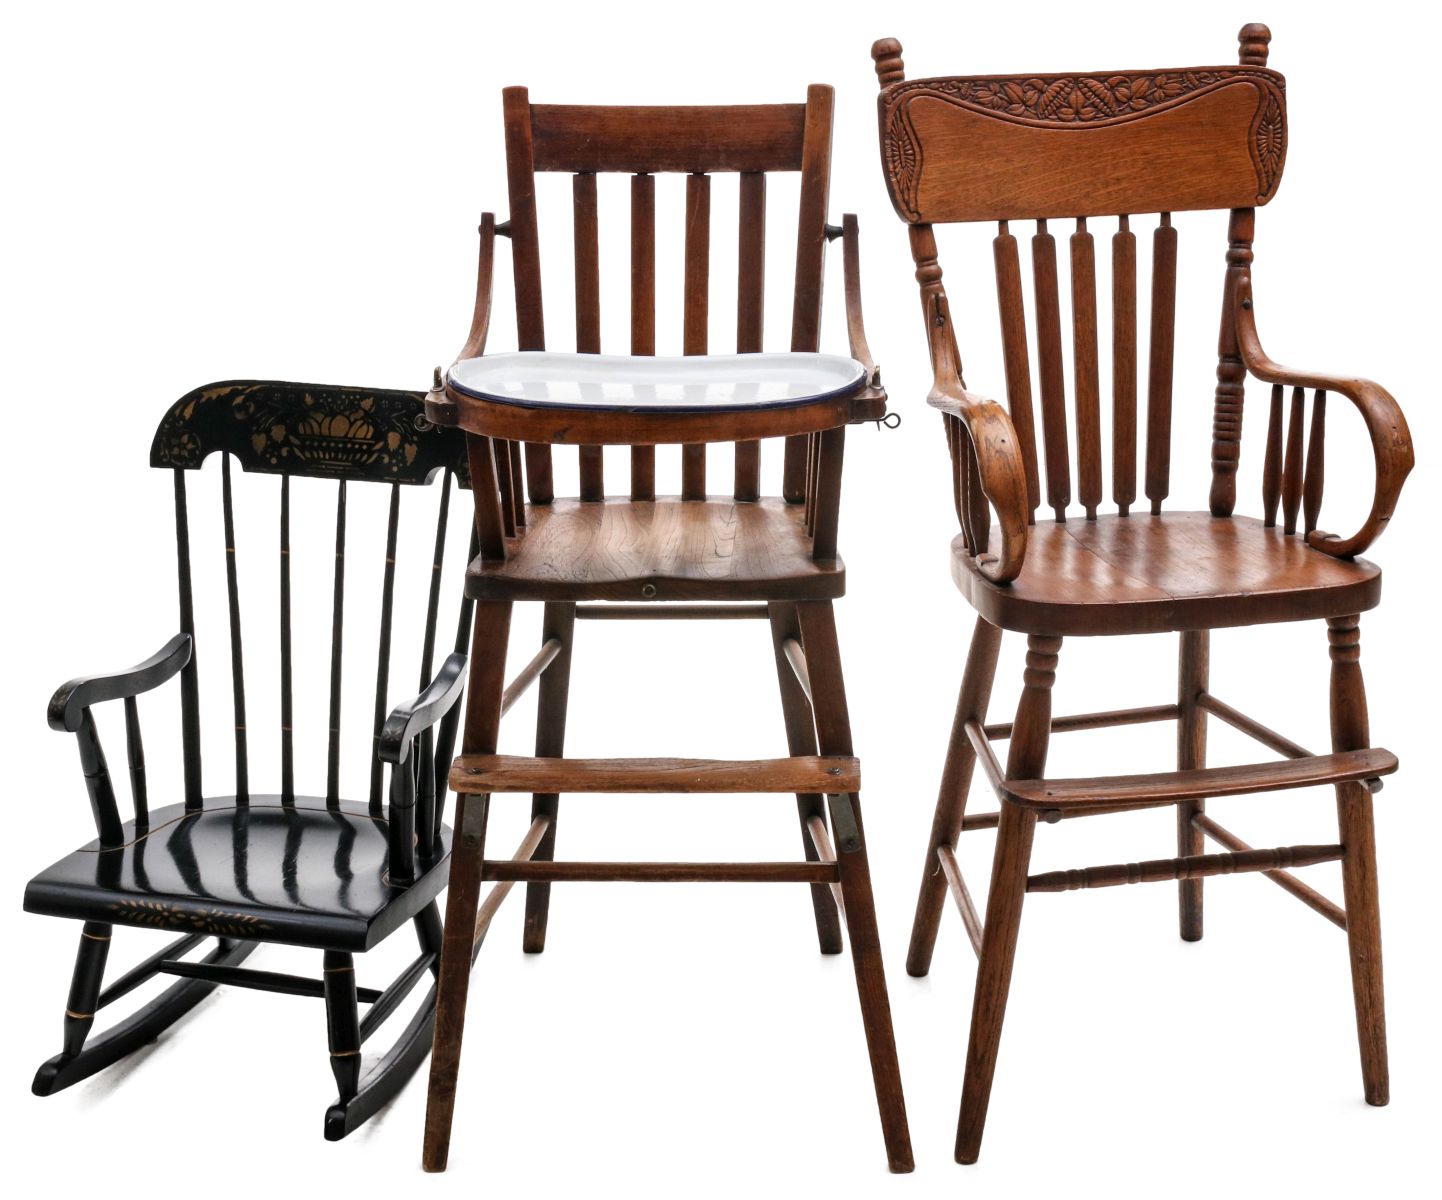 ANTIQUE HIGH CHAIRS AND VINTAGE CHILD'S ROCKING CHAIR